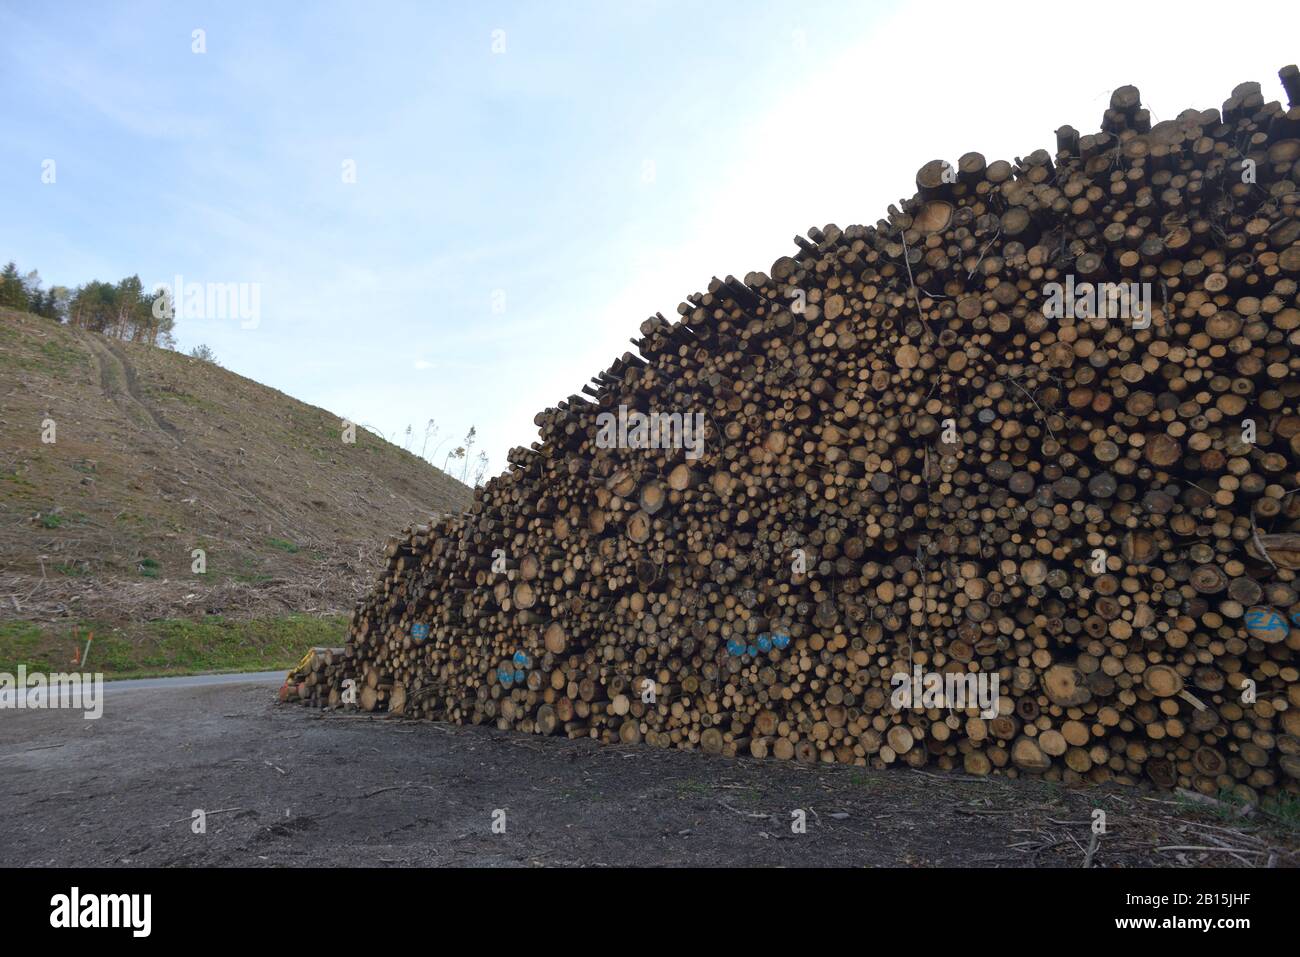 Waldviertel / Lower Austria: Climate crisis born droughts and bark beetle attacks lead to collapse of unnatural spruce and pine plantations. Stock Photo